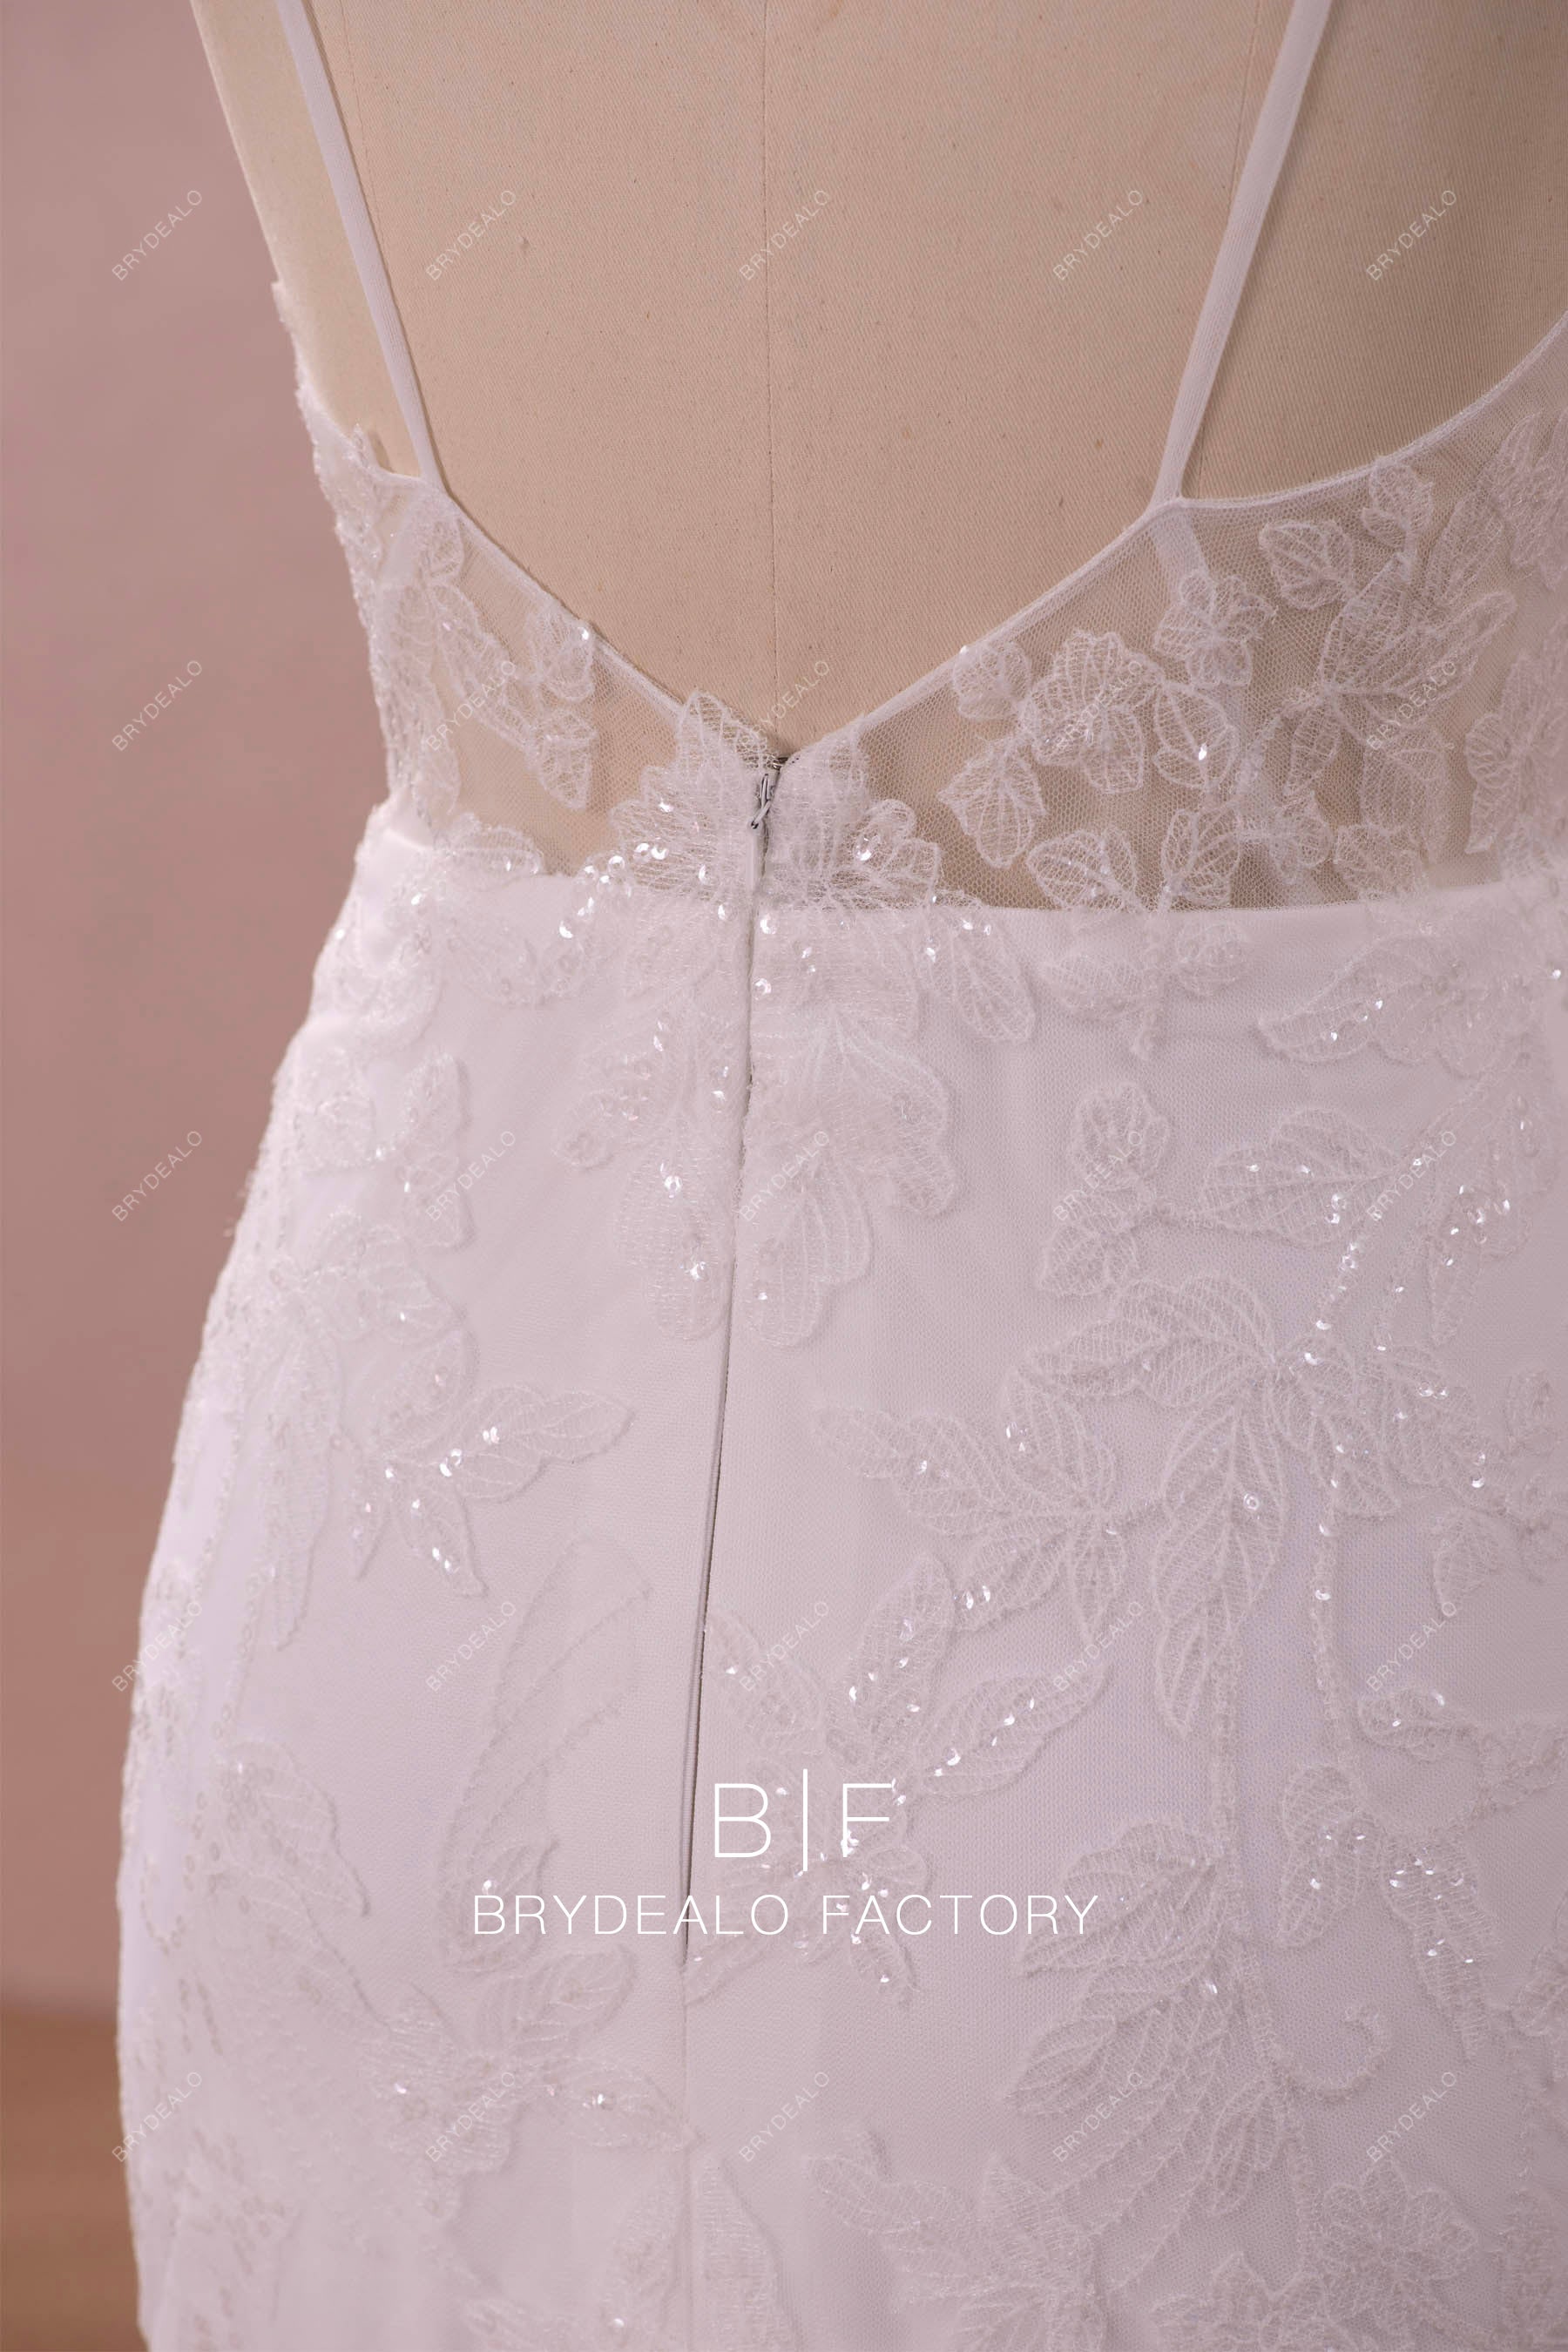 shimmery bridal lace